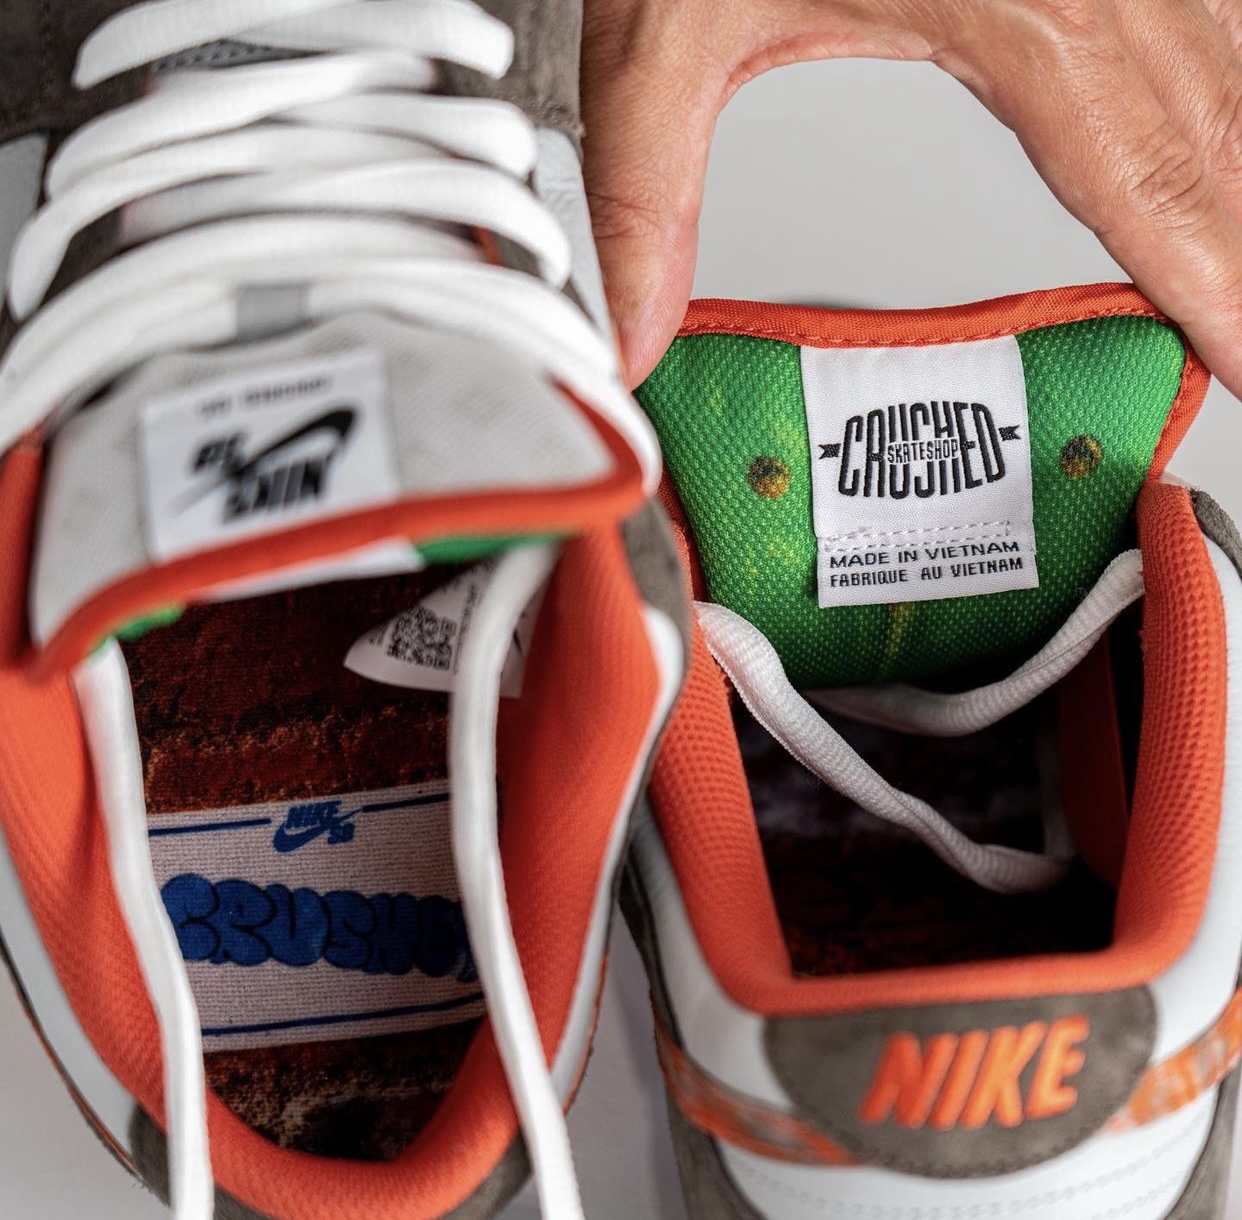 Crushed DC Nike SB Dunk Low DH7782 001 Release Date On Feet 8